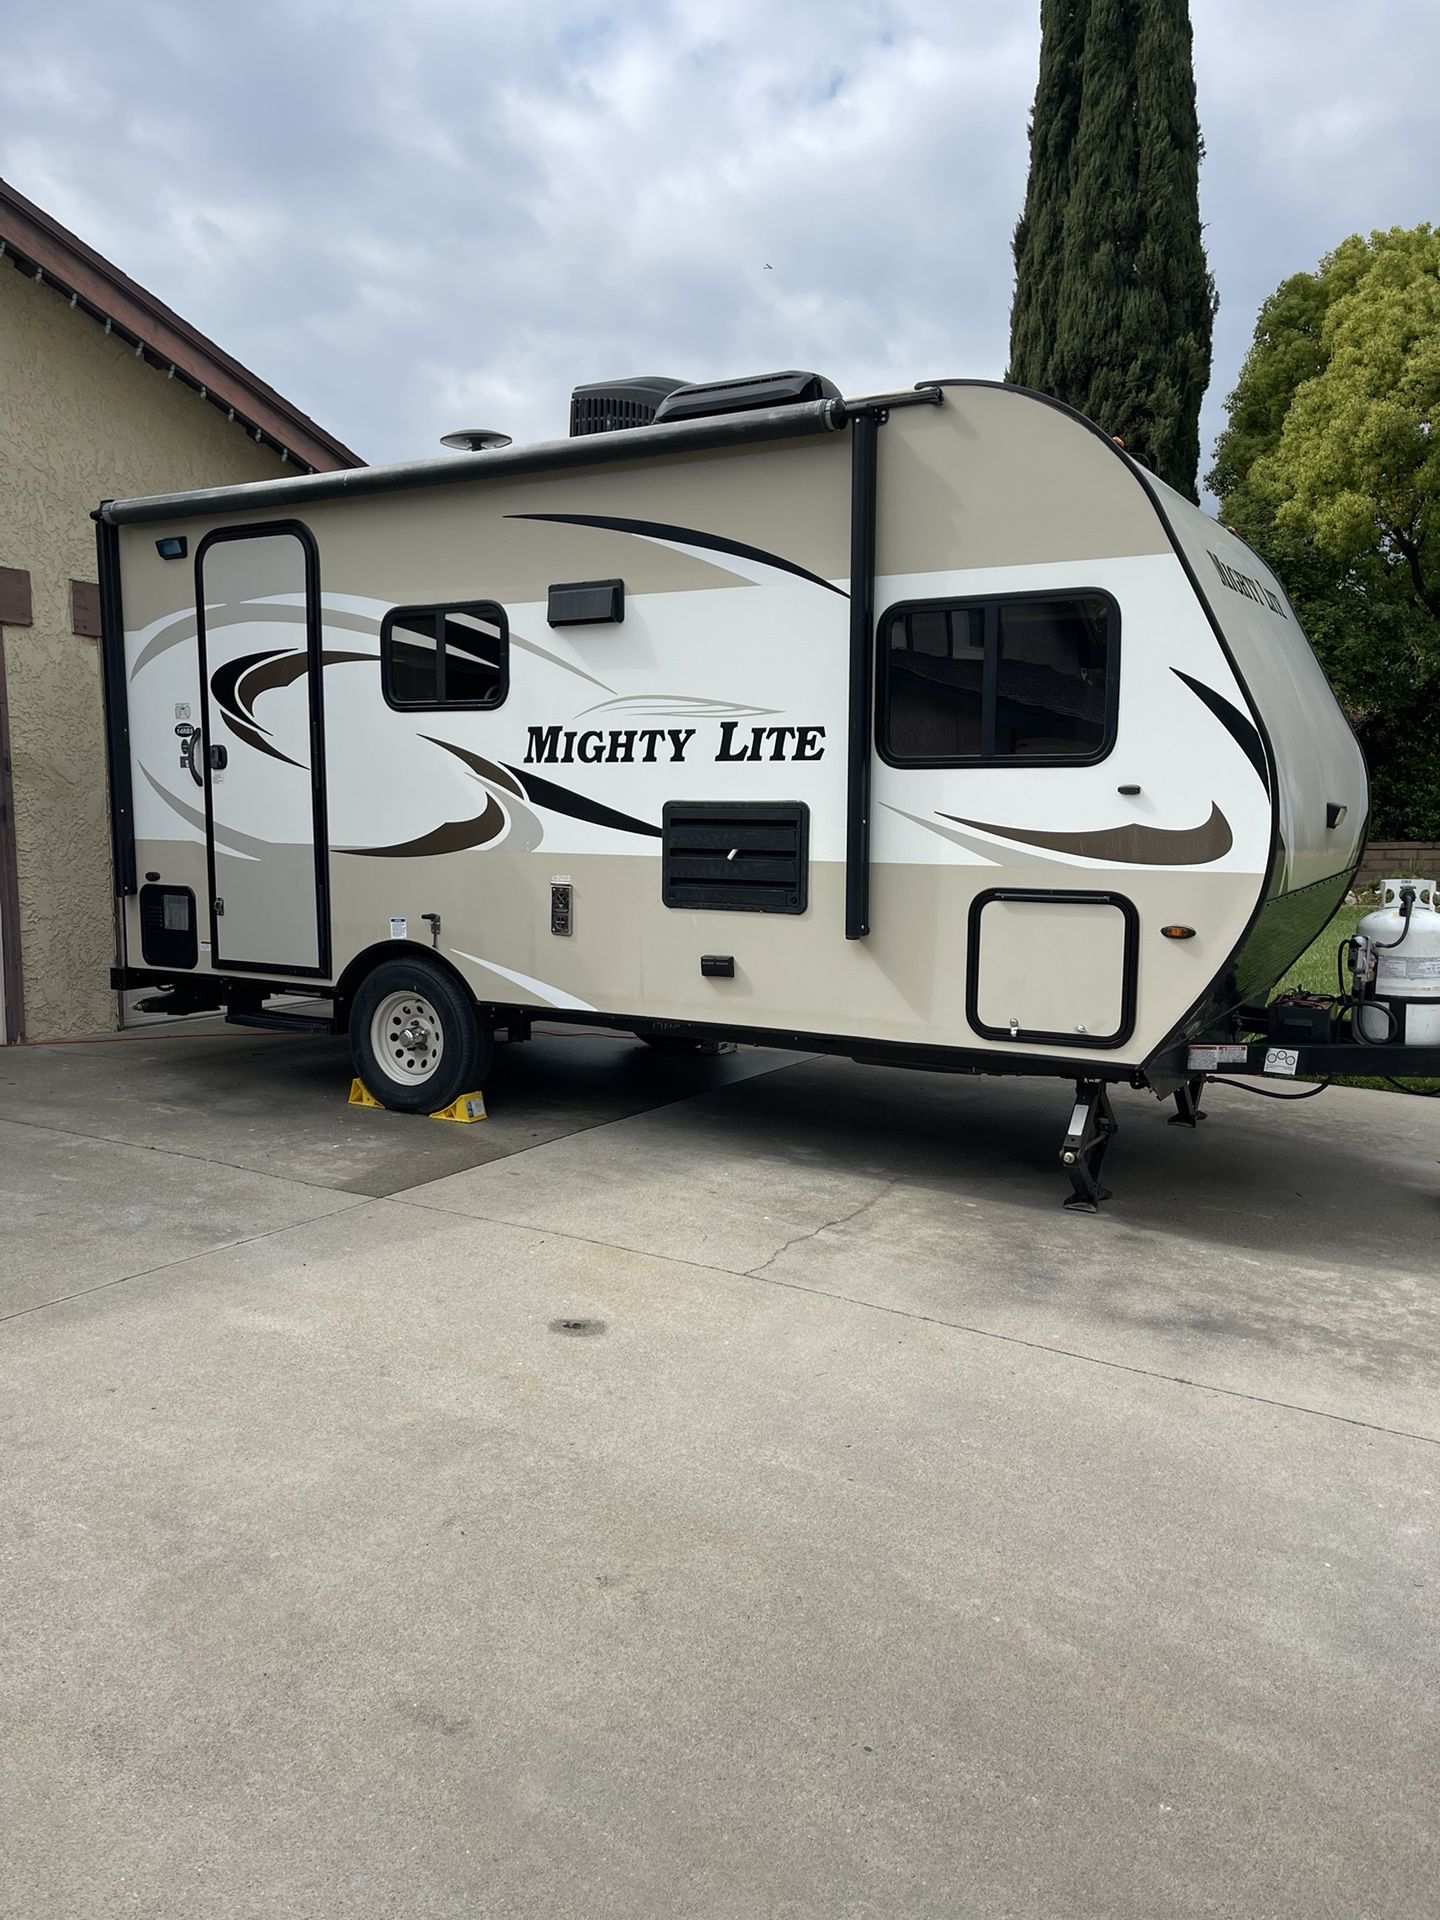 2018 Mighty Lite 16ft Travel Trailer With Slide Out 